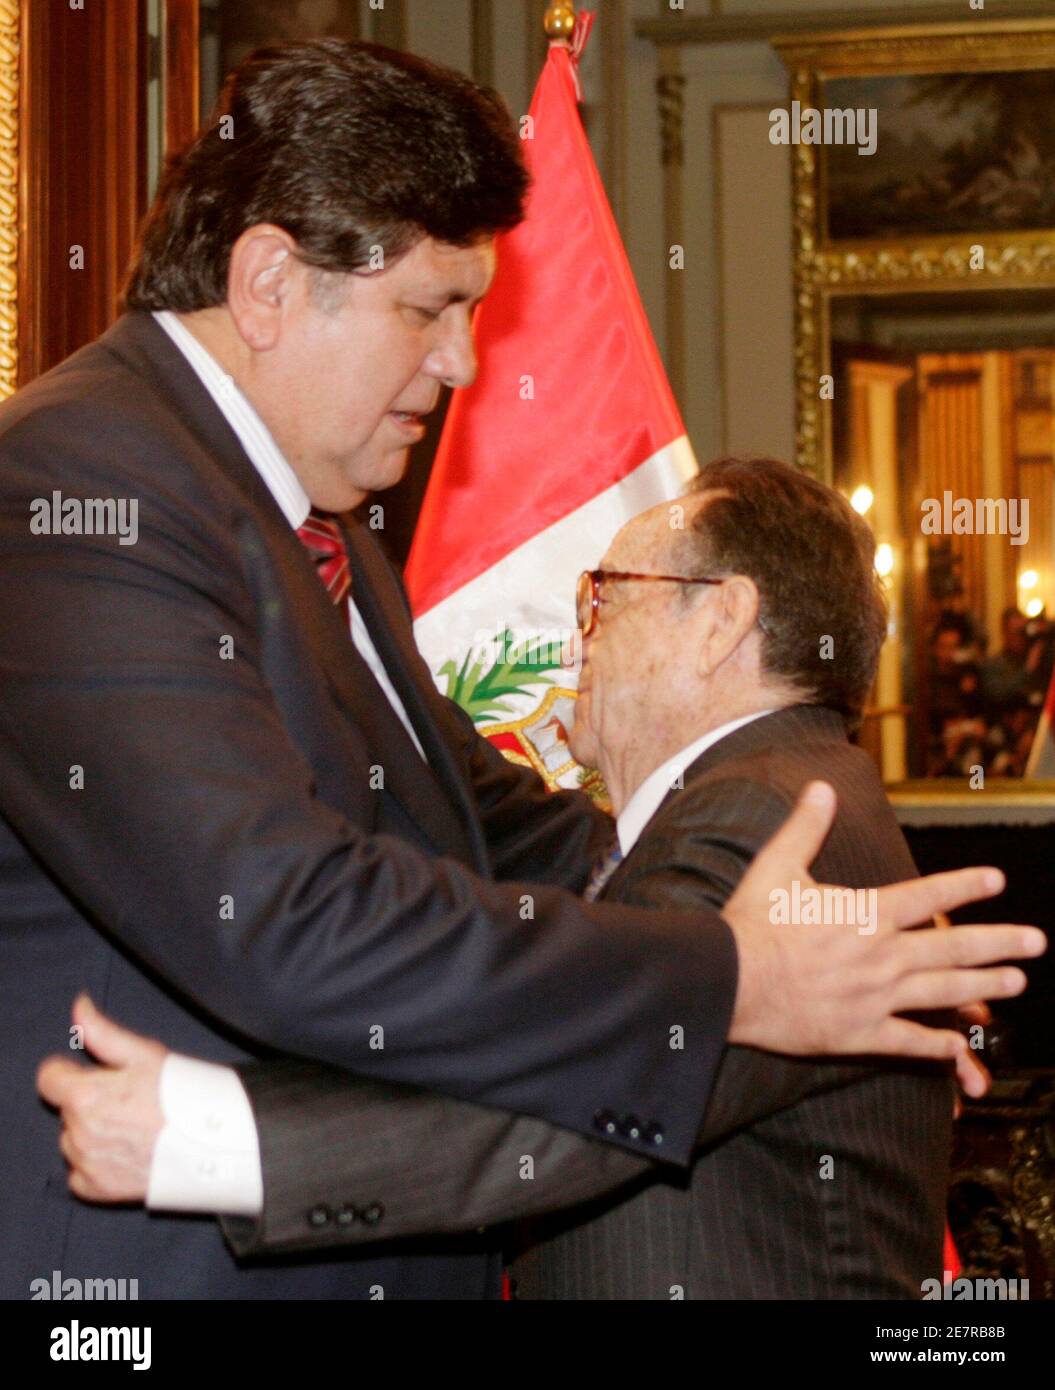 Peru S President Alan Garcia L Embraces Mexican Actor Roberto Gomez Bolanos During A Meeting At The Government Palace In Lima July 16 08 Reuters Mariana Bazo Peru Stock Photo Alamy